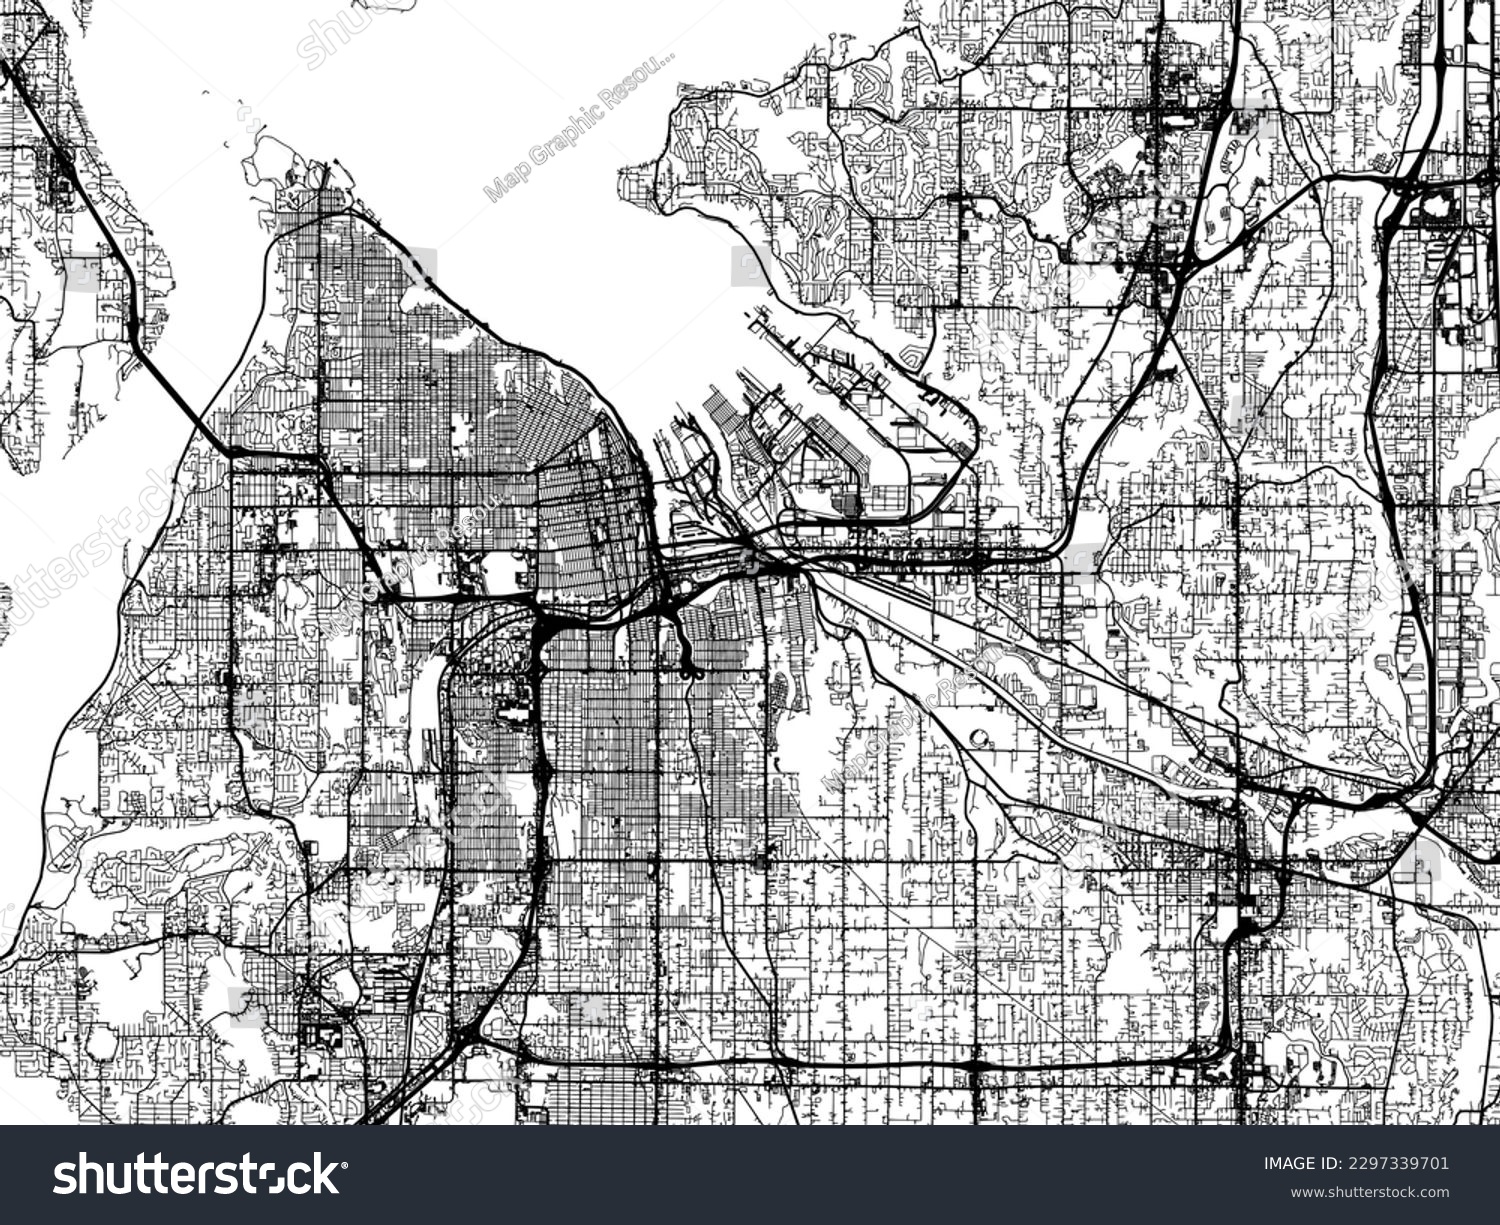 SVG of Vector city map of Tacoma Washington in the United States of America with black roads isolated on a white background. svg